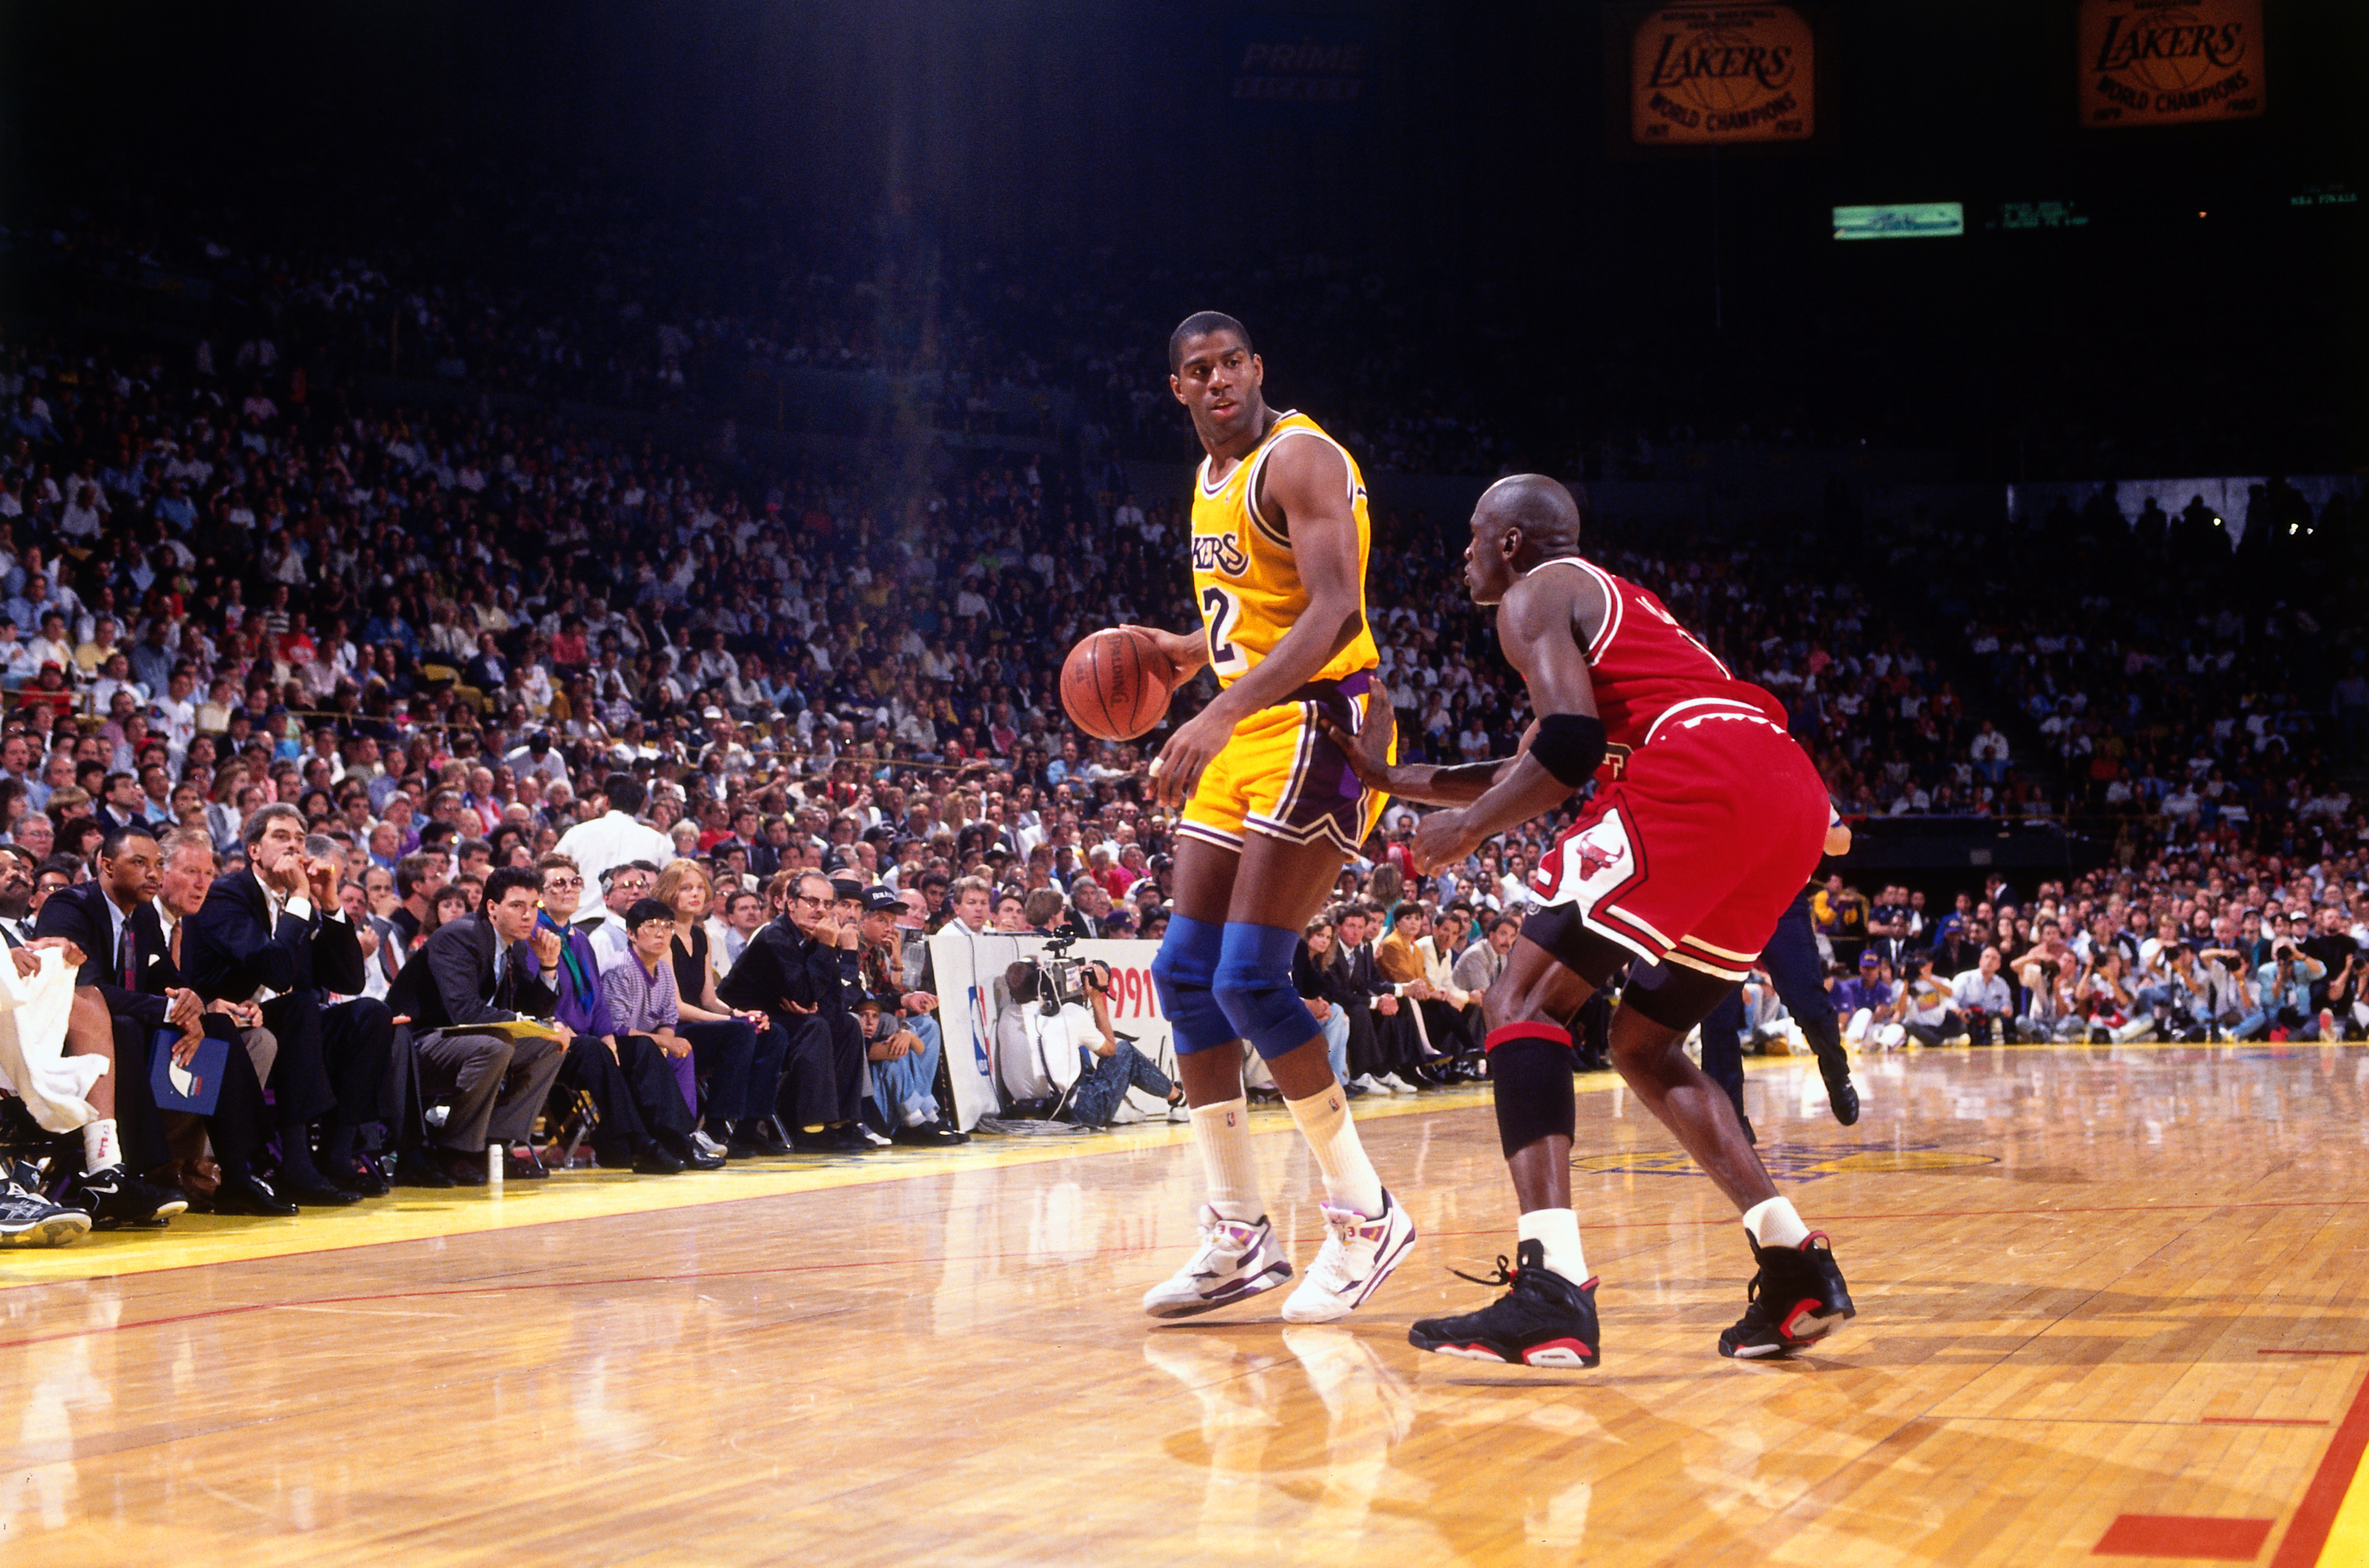 Magic Johnson during Game Five of the 1991 NBA Finals on June 12, 1991 at the Great Western Forum in Inglewood, California. (Andrew D. Bernstein—NBAE/Getty Images)